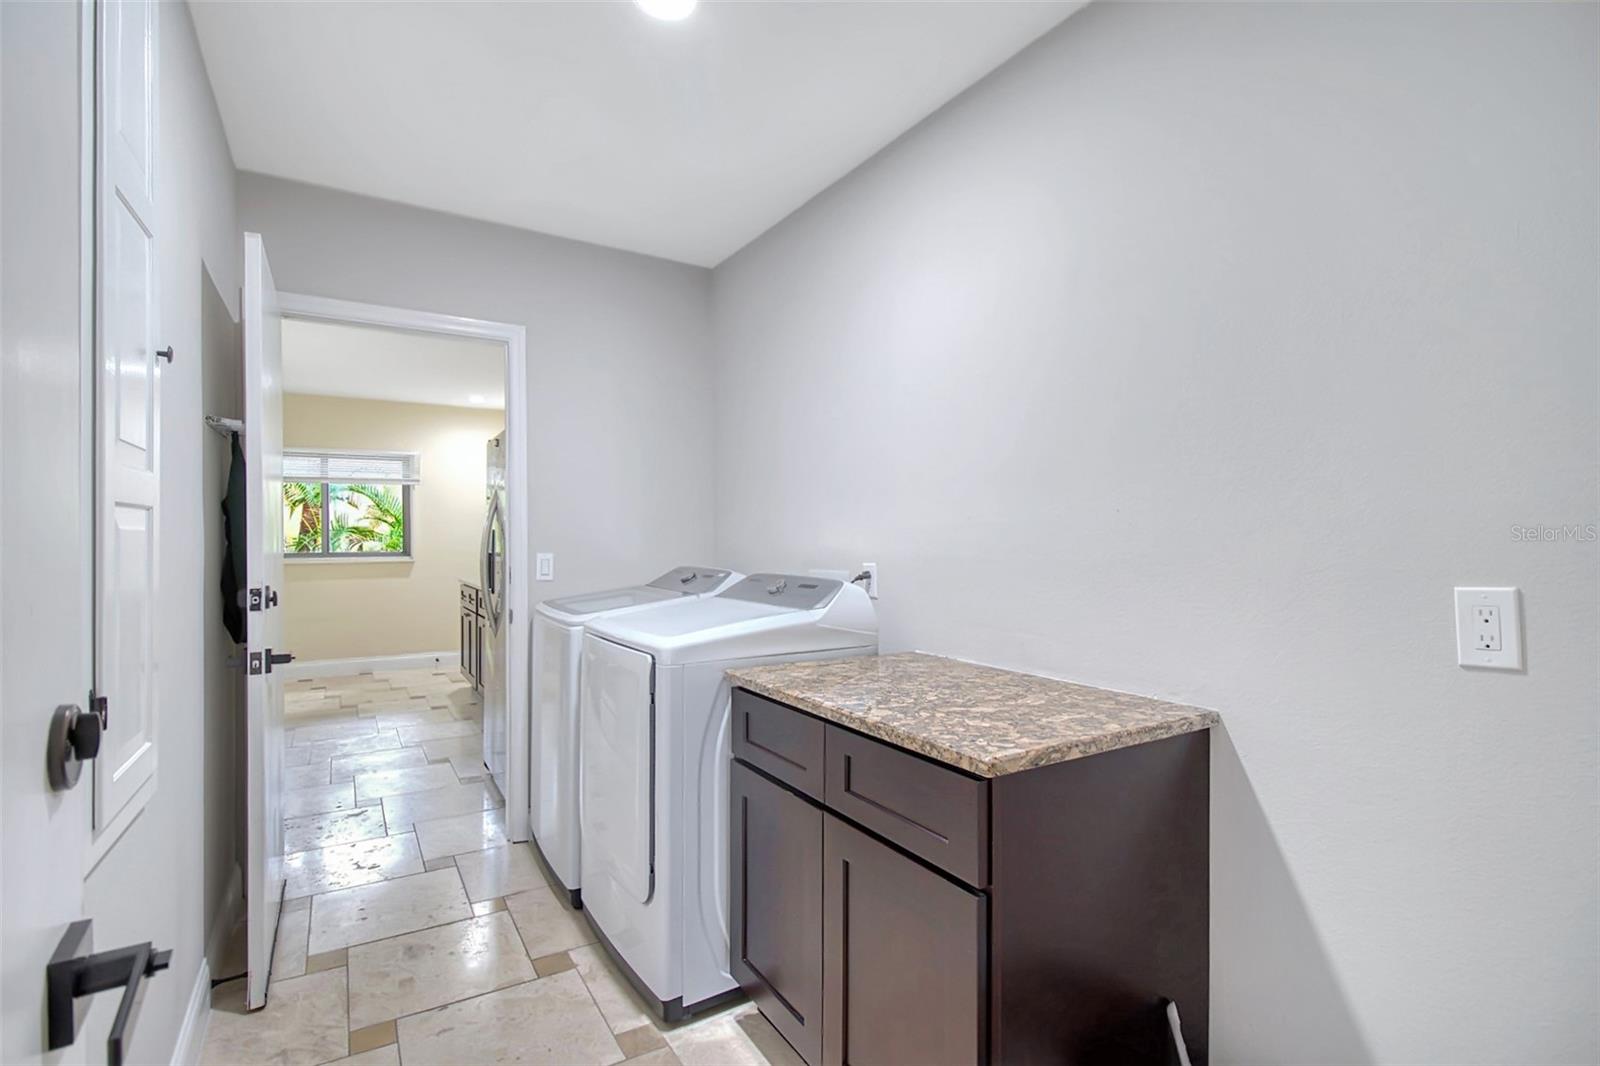 Laundry room leading to self contained In Law apartment/teen suite/guest suite/Primary bedroom 2/rental apartment